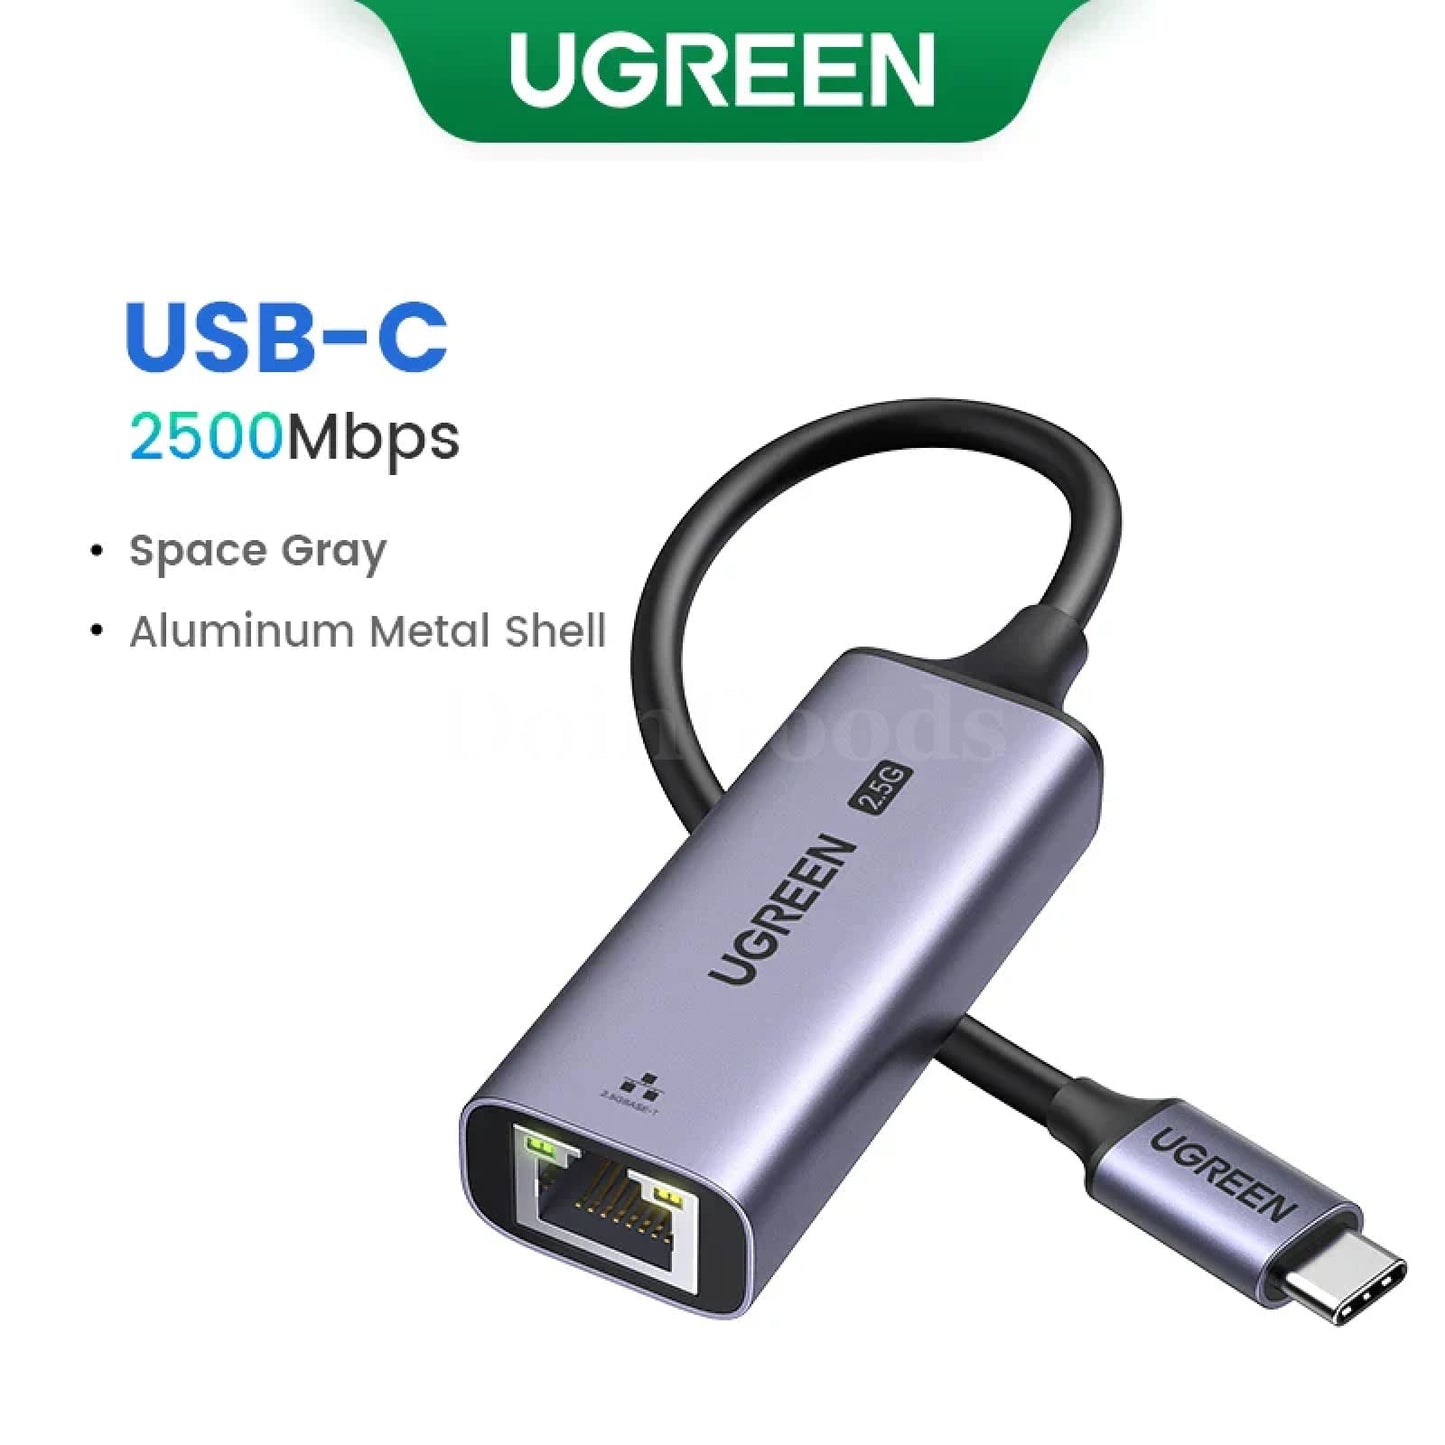 Ugreen Usb 3.0 Ethernet Adapter Network Card For Win 10 Pc Xiaomi Mi Box Usb-C 2500Mbps 301635